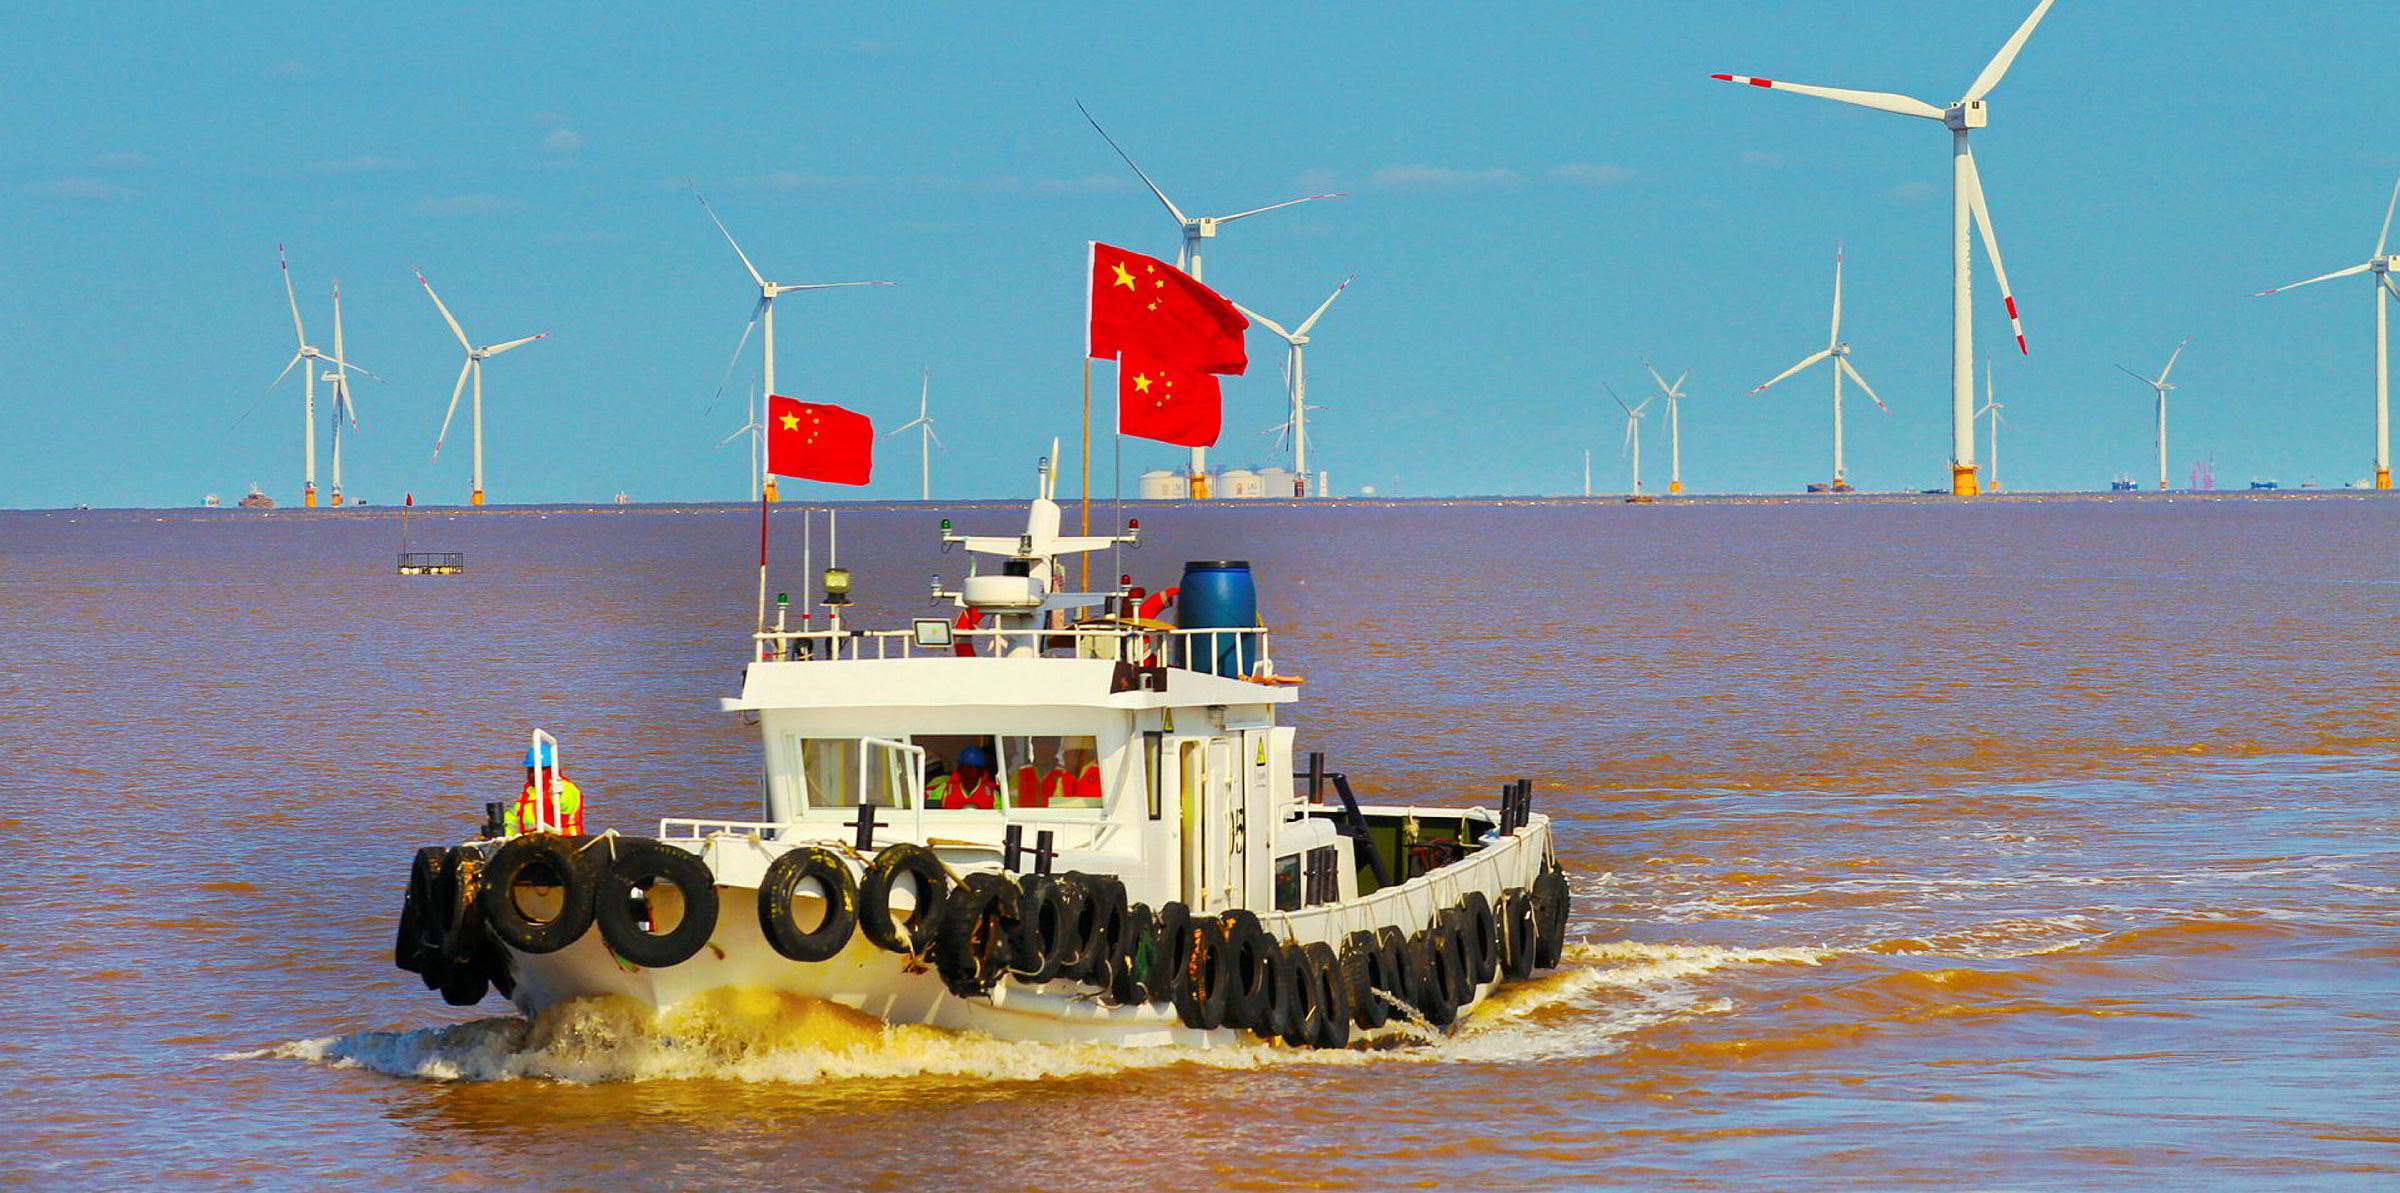 China Has Switched On the Largest Wind Turbine Ever